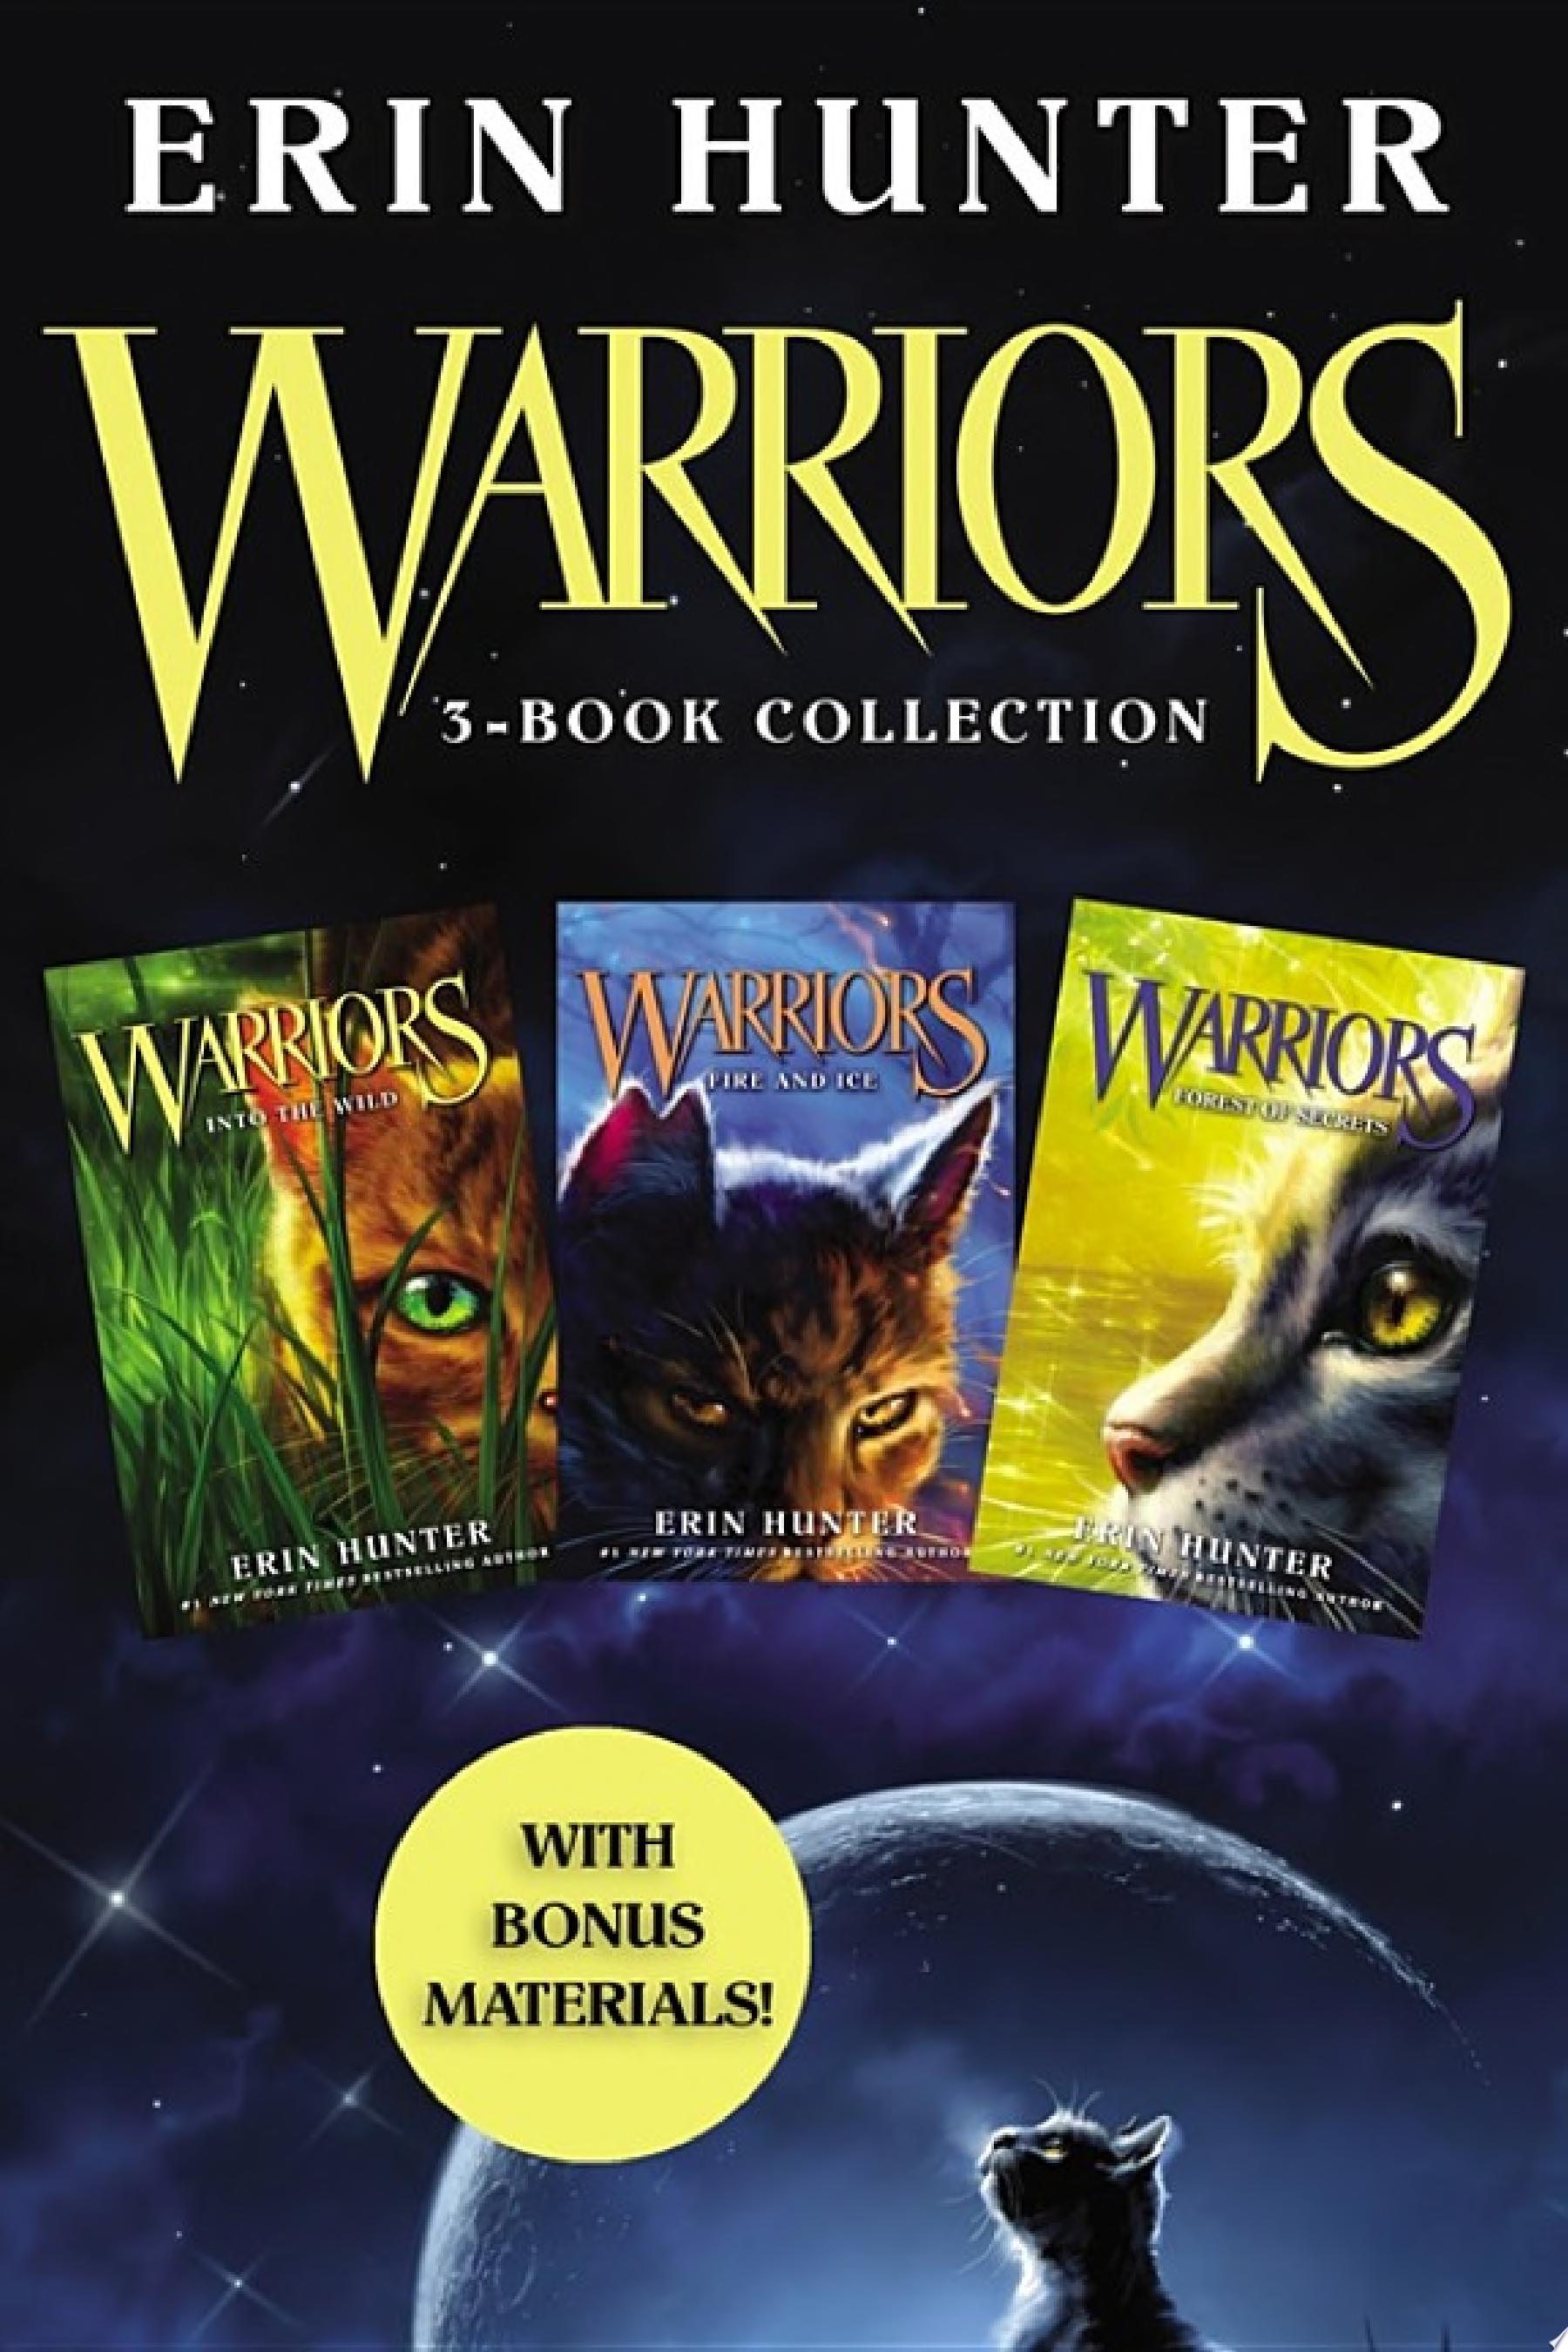 Image for "Warriors 3-Book Collection with Bonus Material"